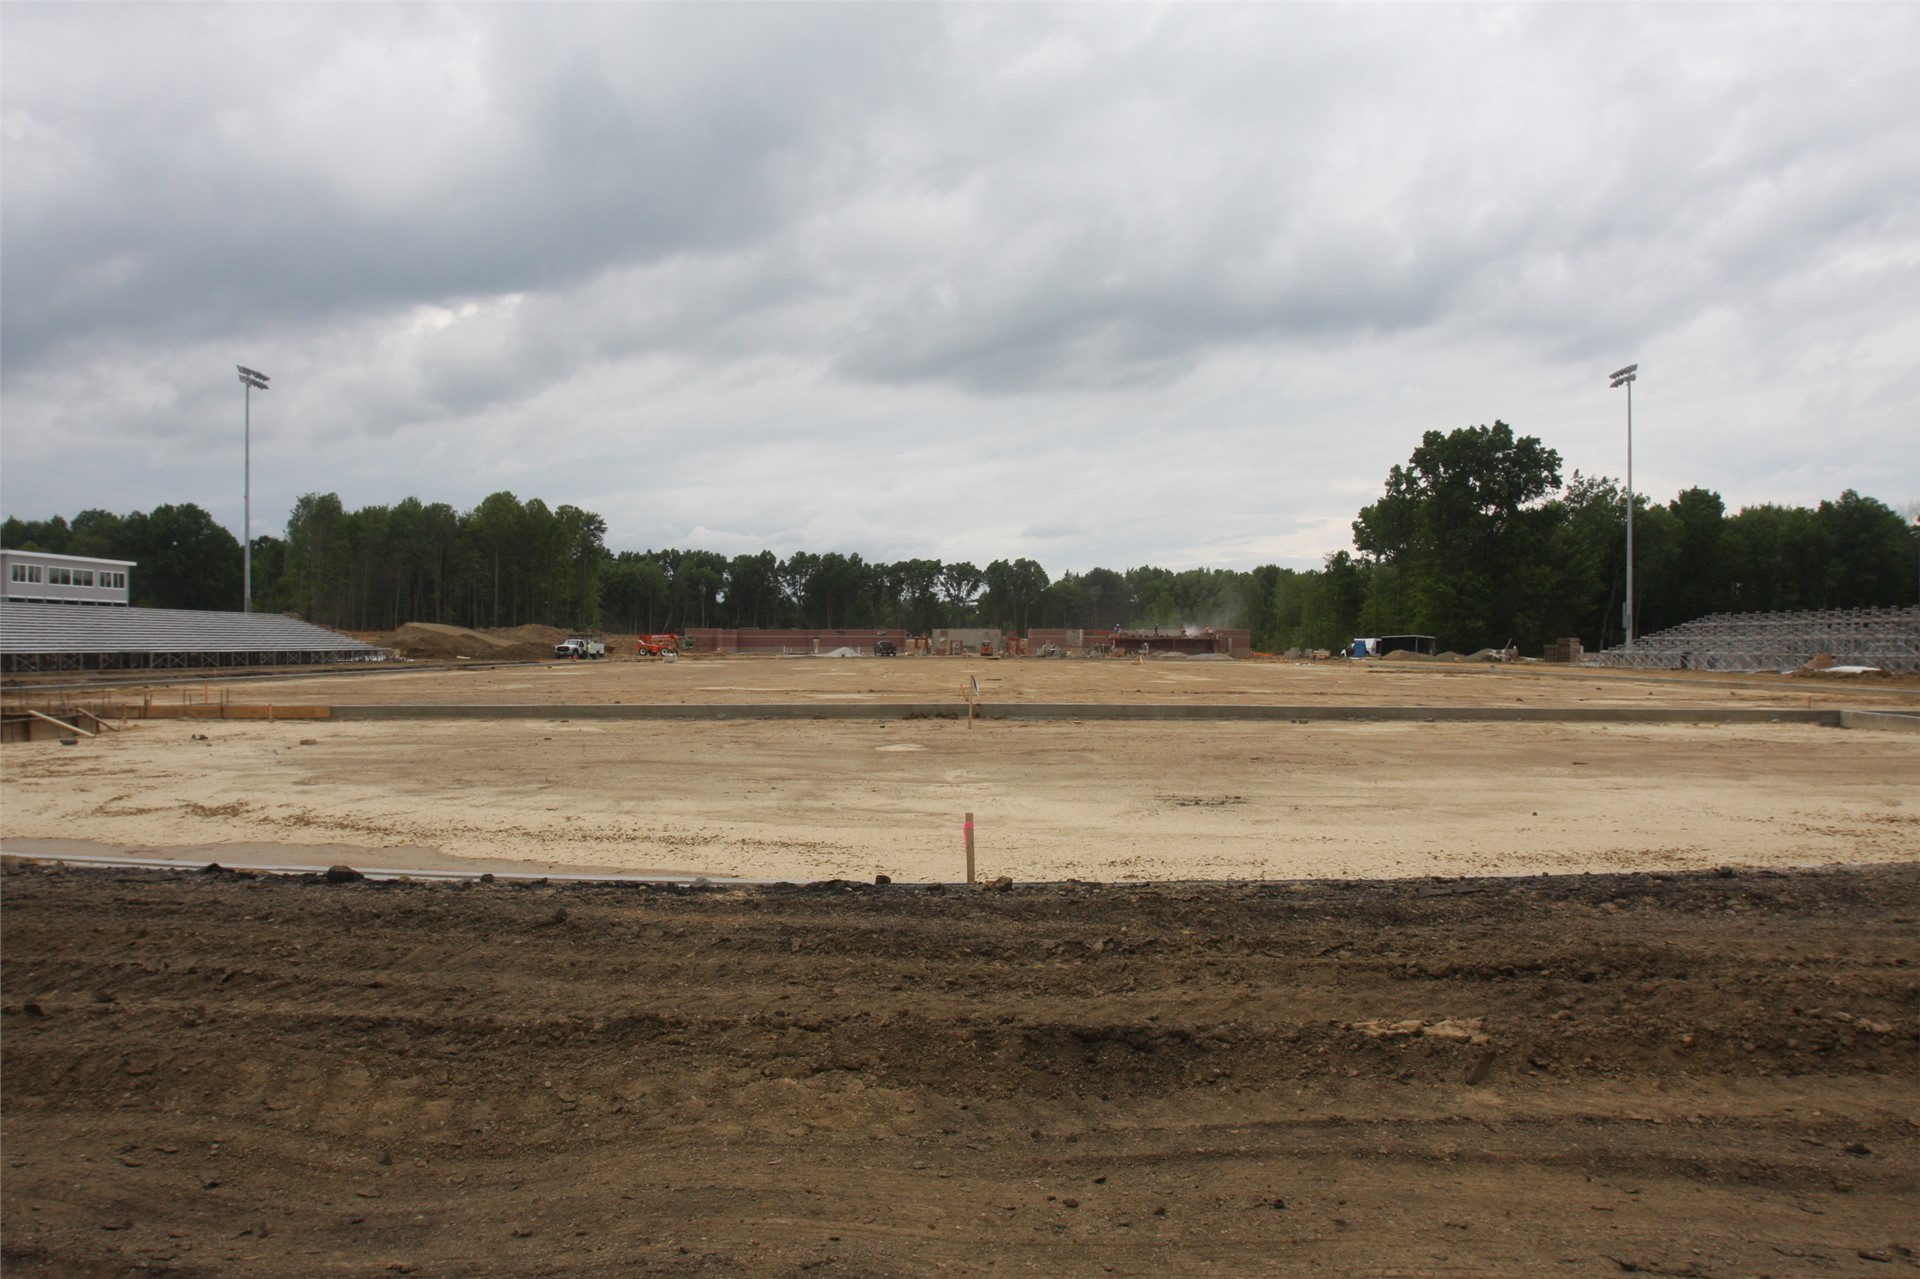 View of D area and field from the south end of track (in front of score board)